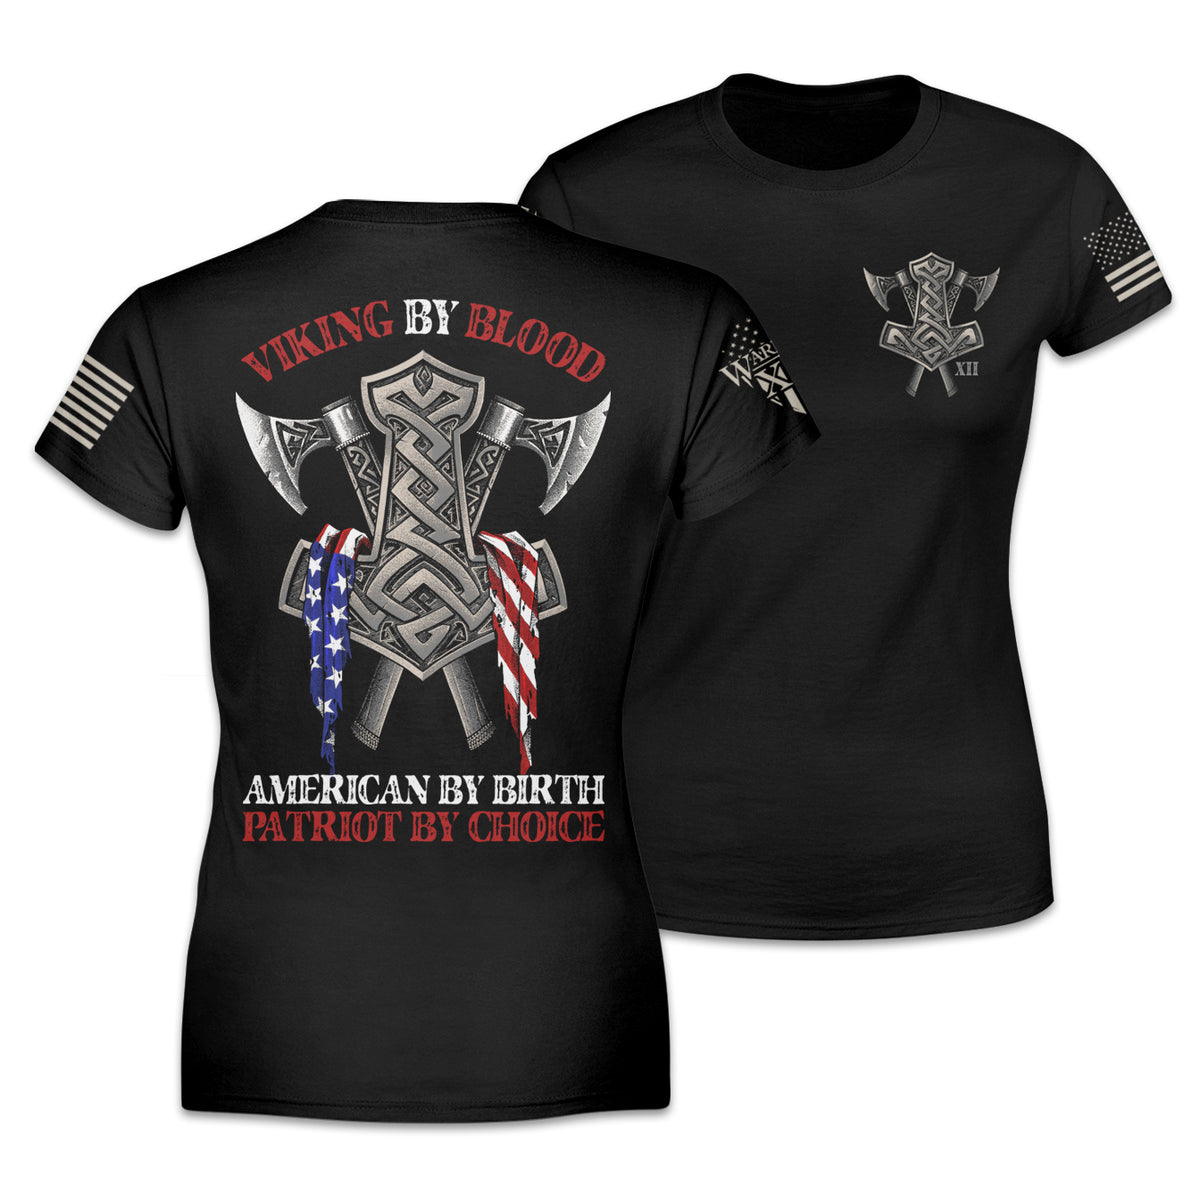 Front & back black women's relaxed shirt with the words "Viking by blood, American by birth, patriot by choice" with viking axes printed and an American flag printed on the shirt.